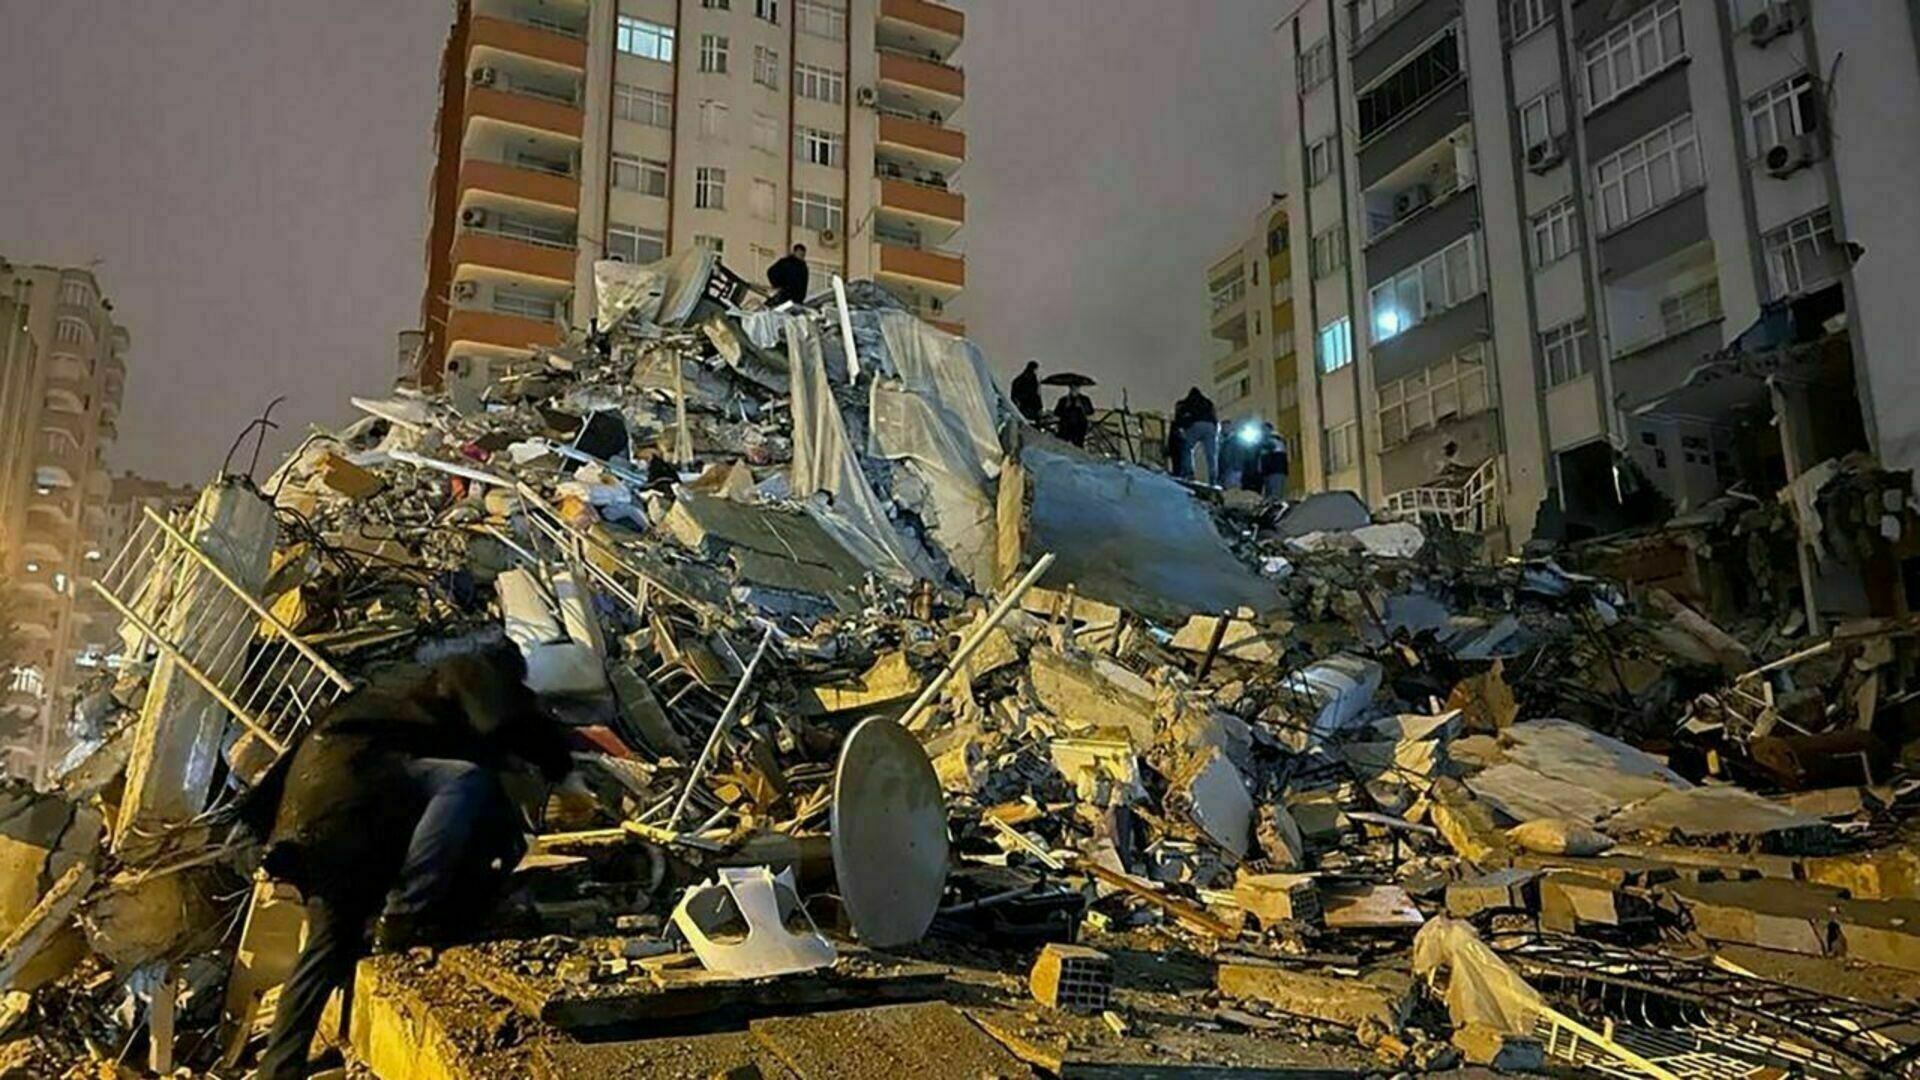 There is a Russian family of four members under the wreckage in Turkey